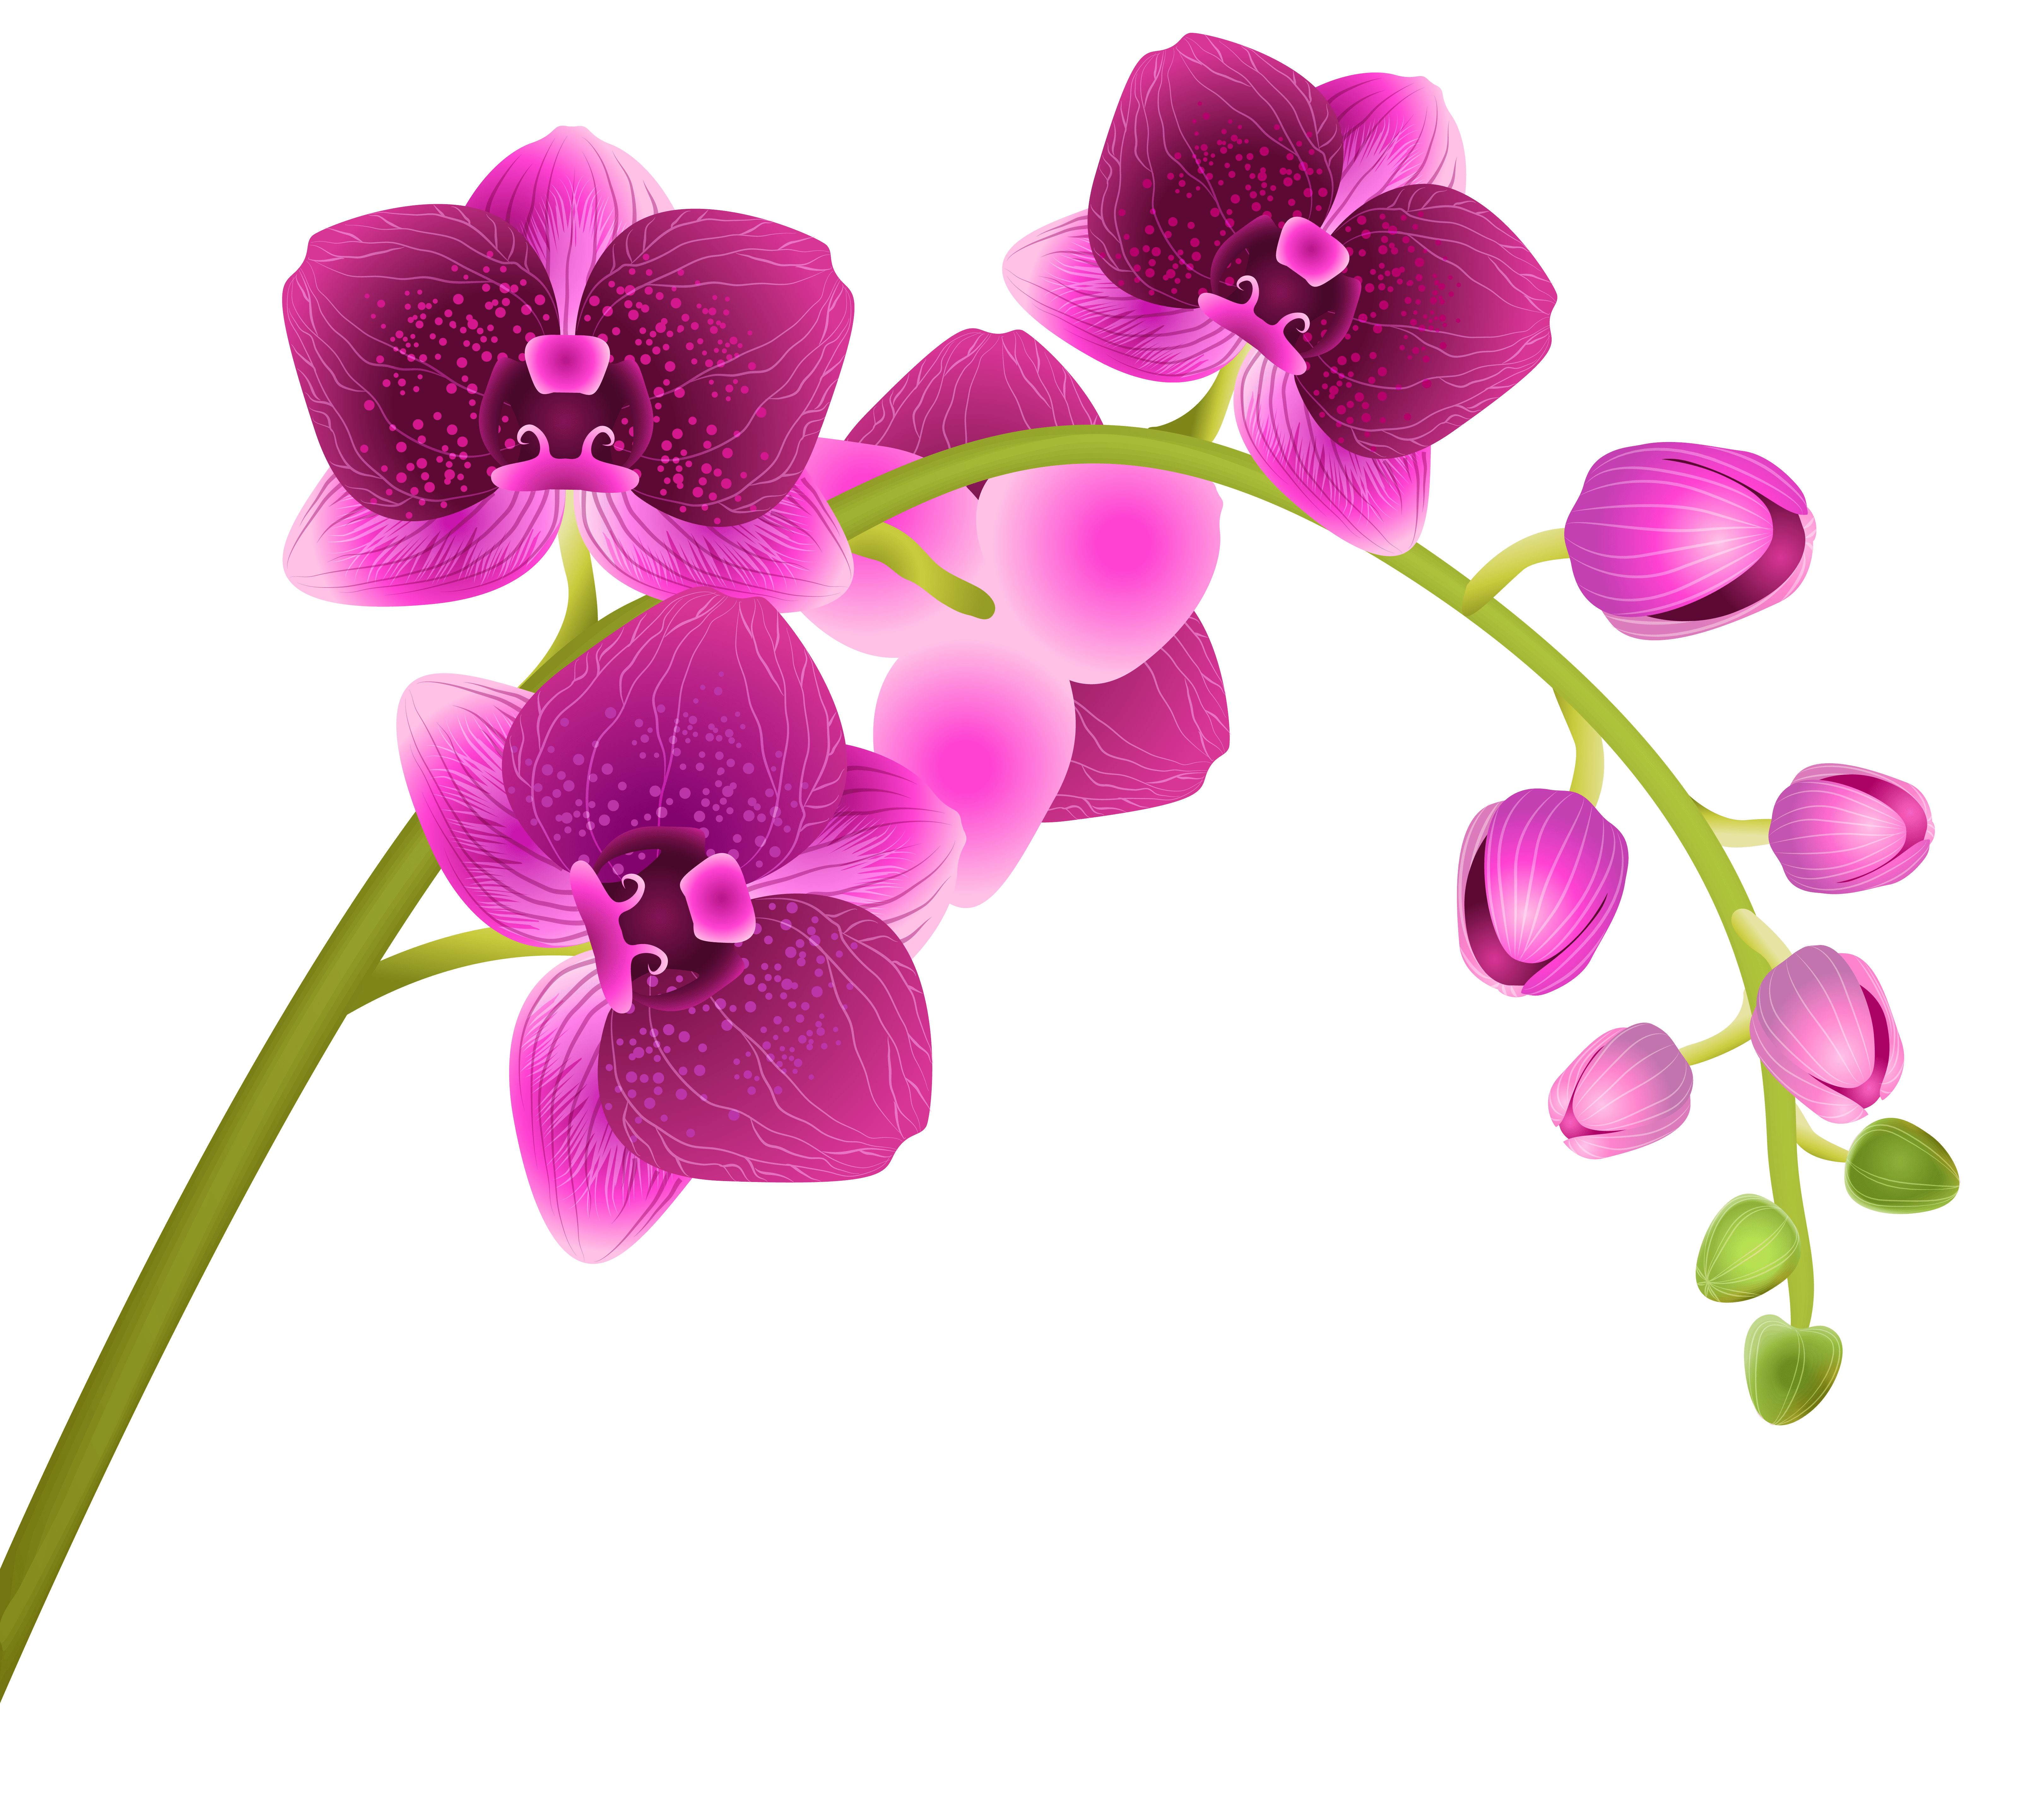 Orchid Flower Logo - Orchid Flower Transparent PNG Clip Art Image | Gallery Yopriceville ...